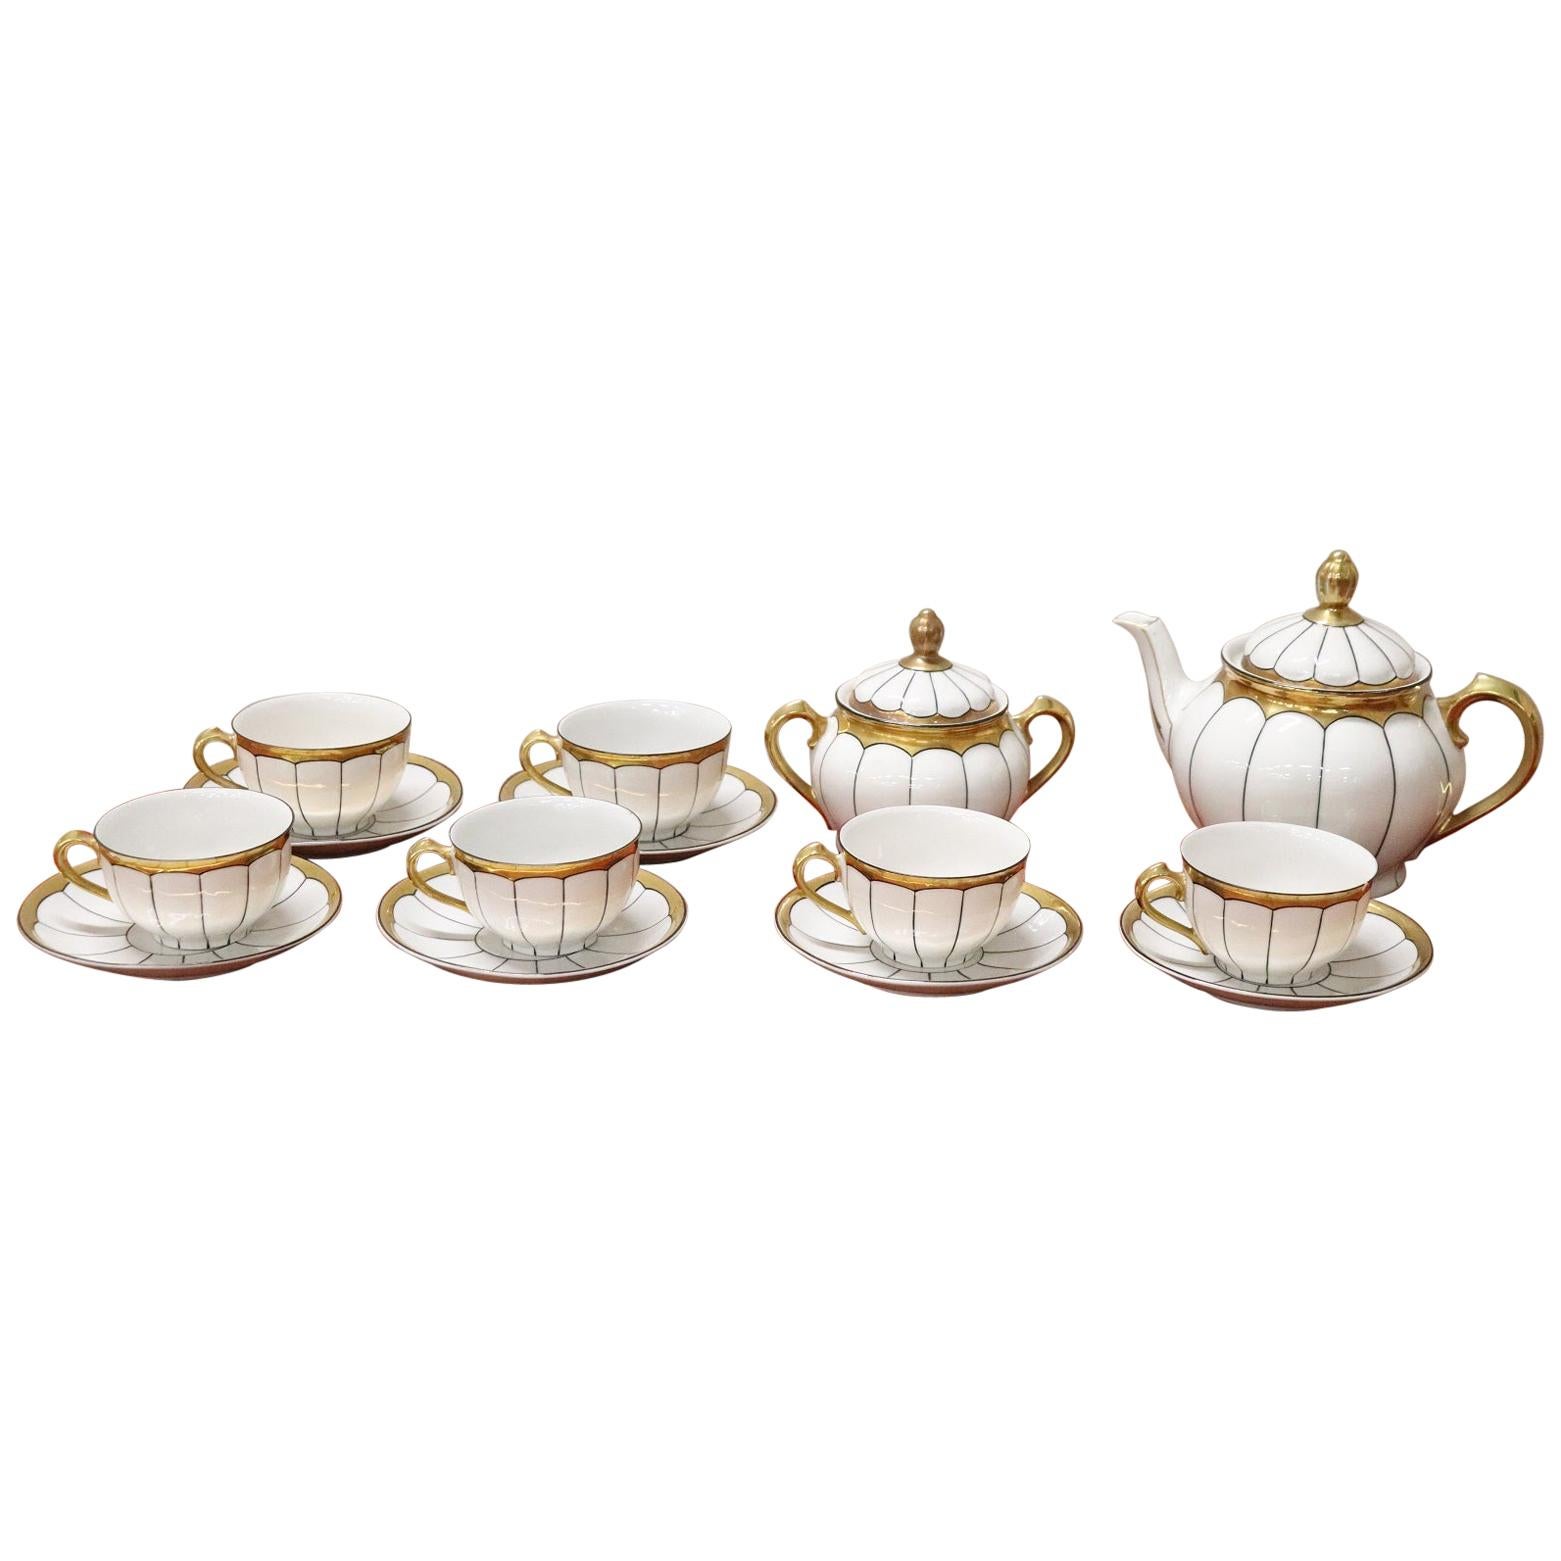 German White and Gold Porcelain Tea Set by Schaller, 15 Pieces